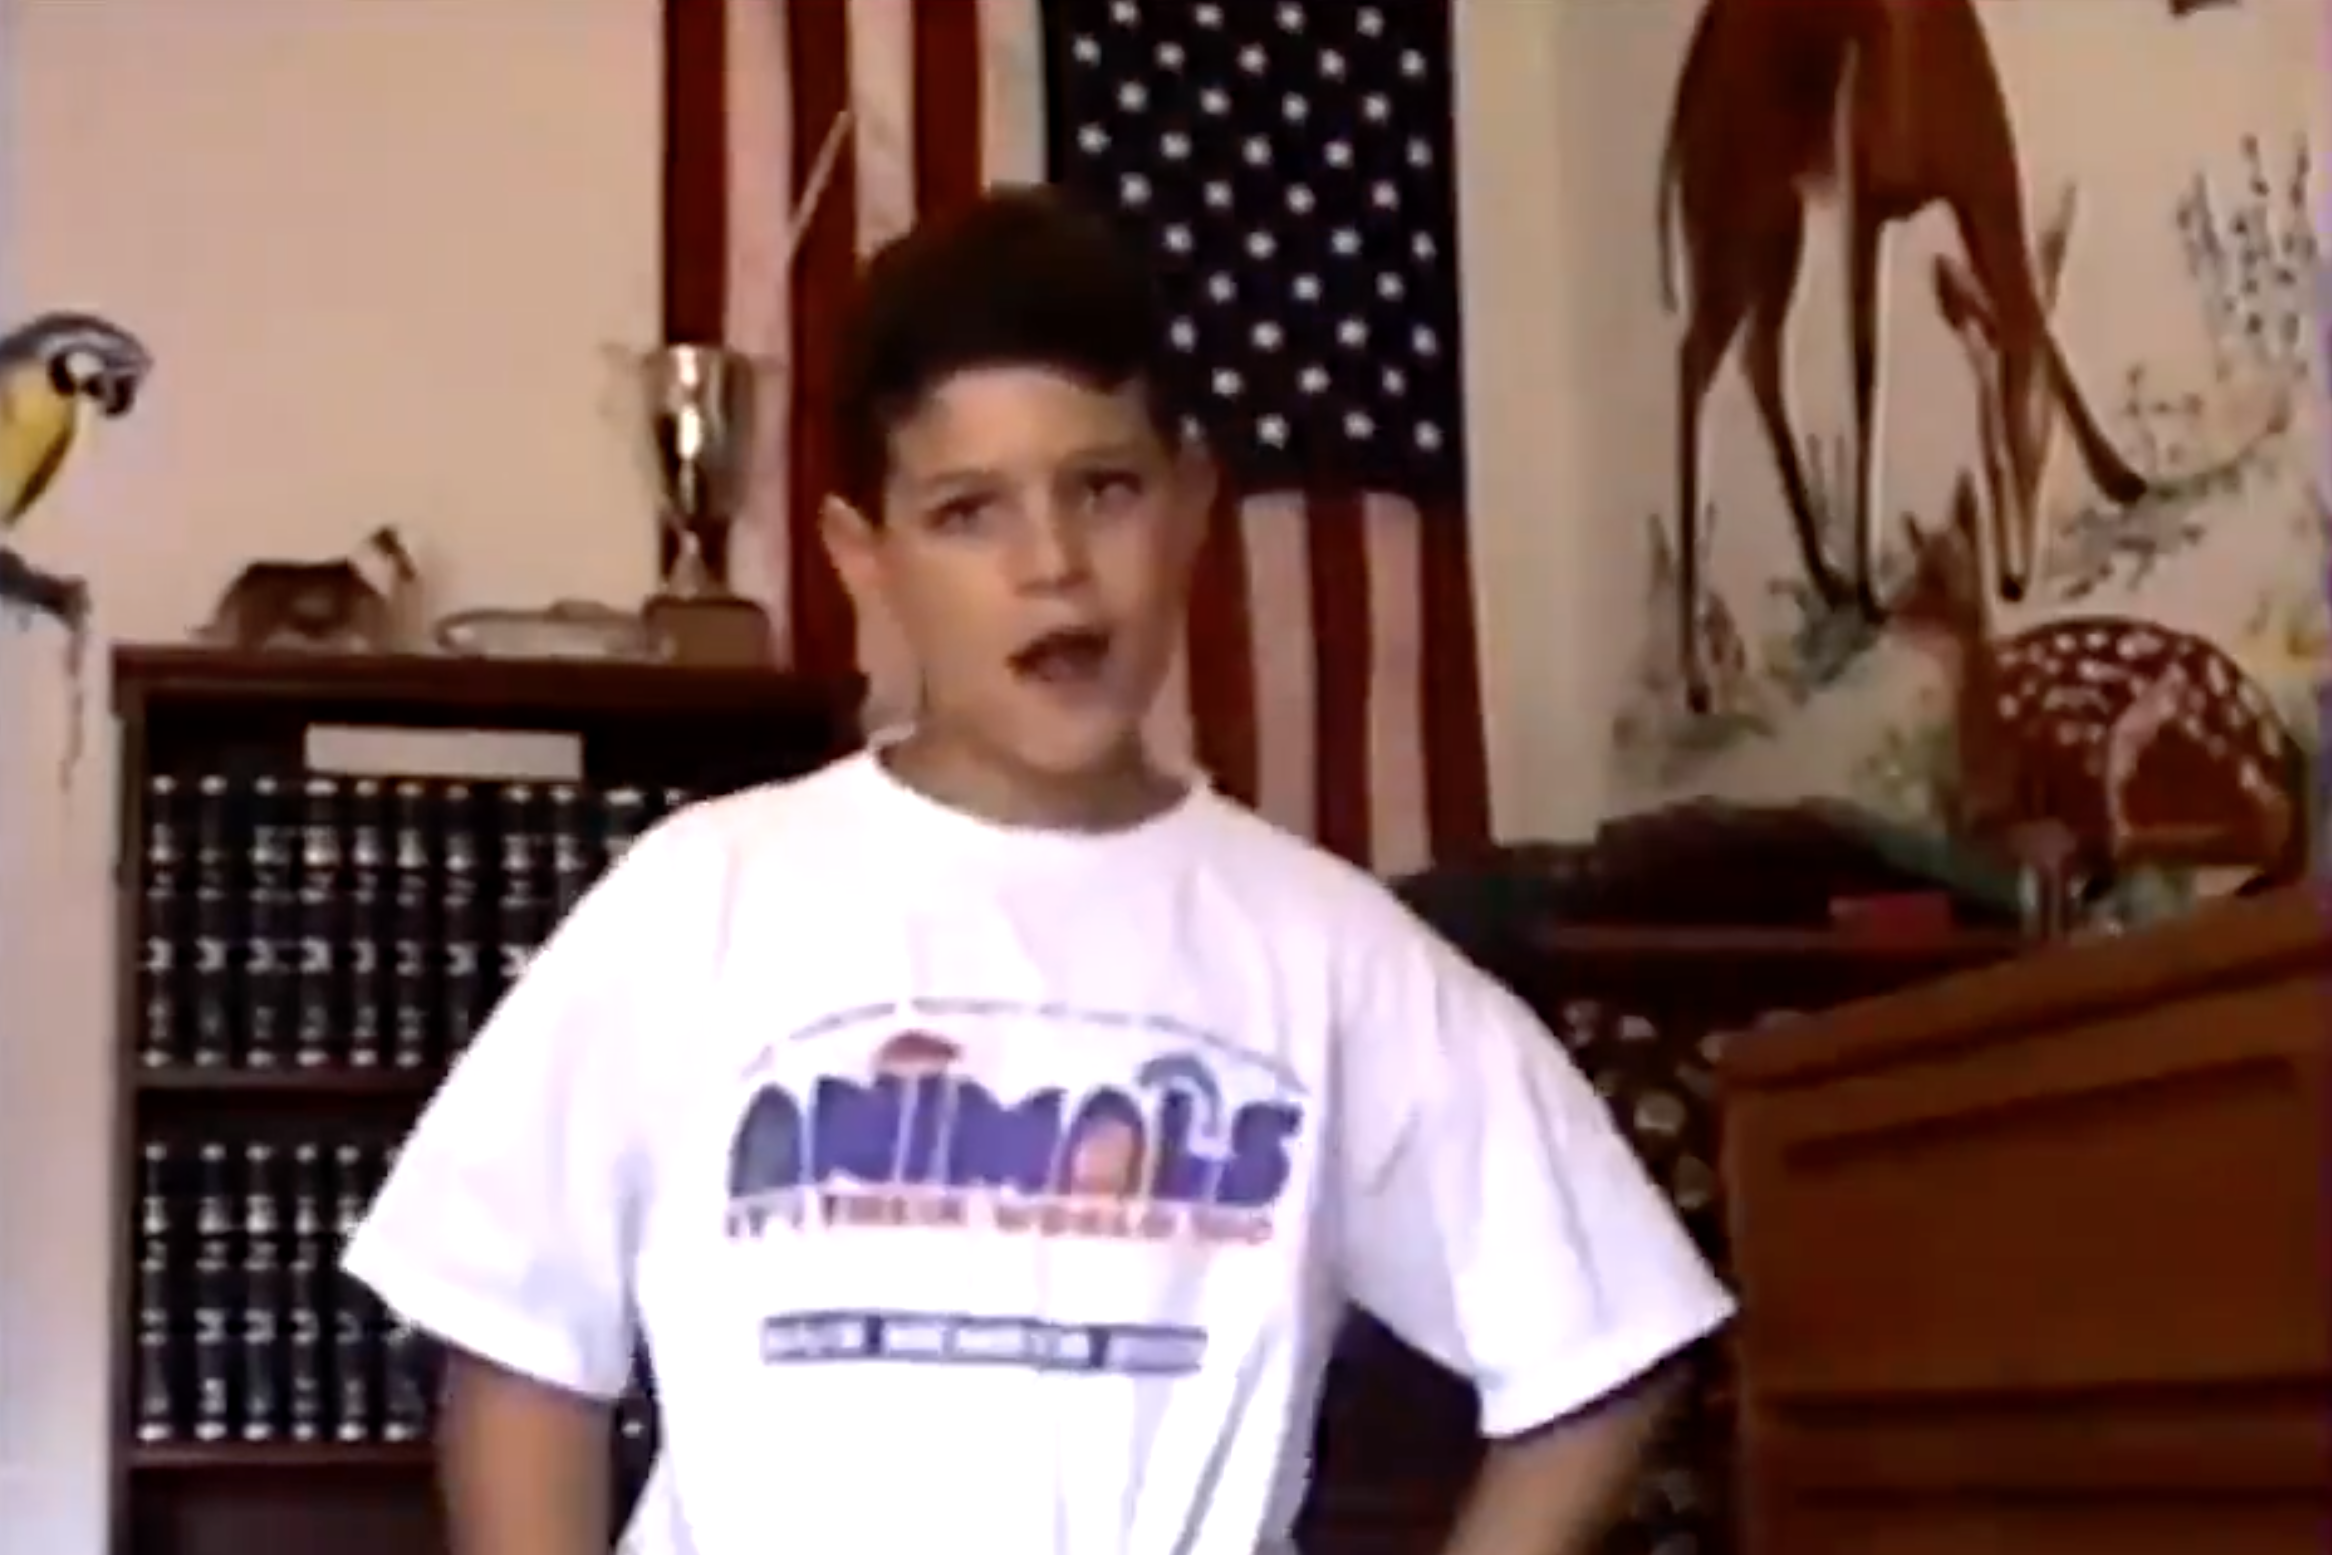 The author, as a 9-year-old boy, dancing in a large white T-shirt with his hands on his hips and his head slightly tilted. An American flag is on the wall in the background.